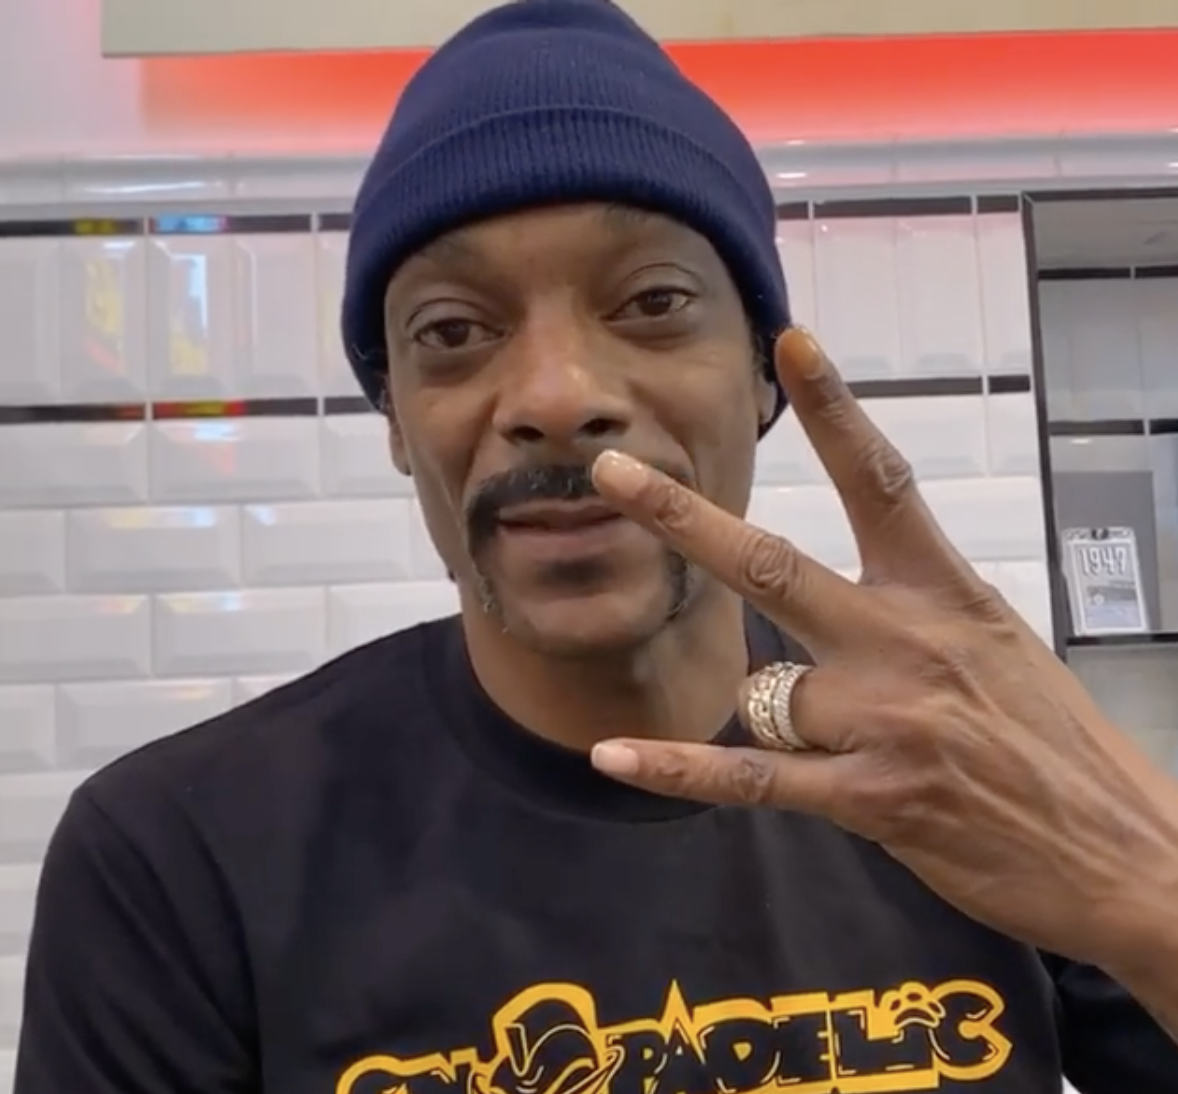 Snoop talking and holding up his hand in a W shape